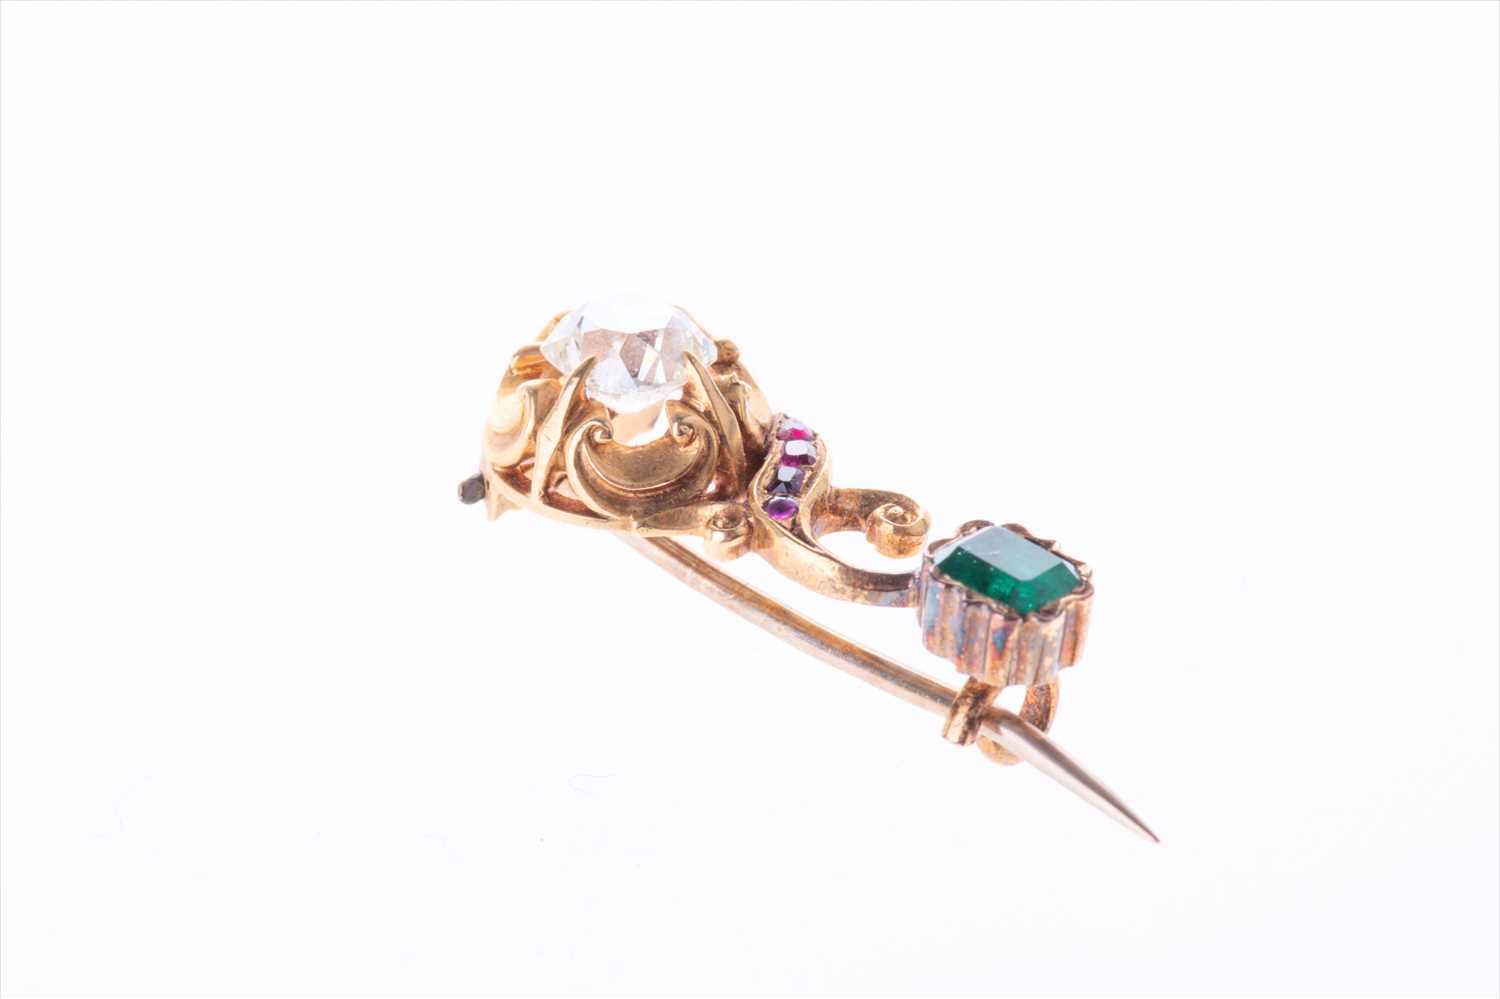 A charming late 19th century yellow gold, diamond, ruby, and emerald broochof swirled bar design, - Image 4 of 7